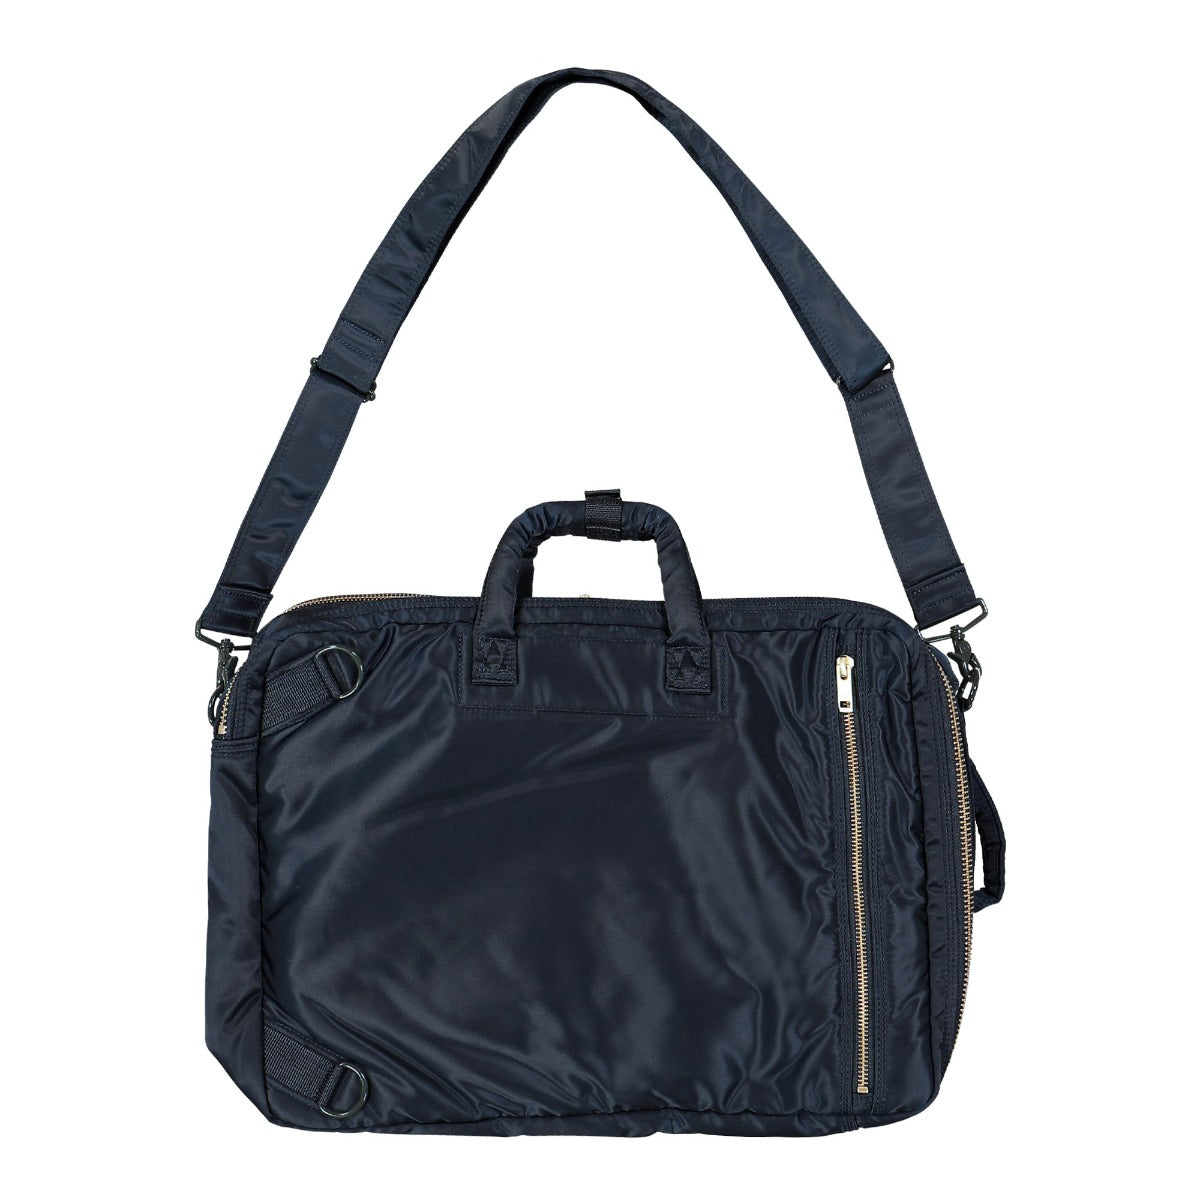 Discover Travel bags & cases from top brands now at Zalando!